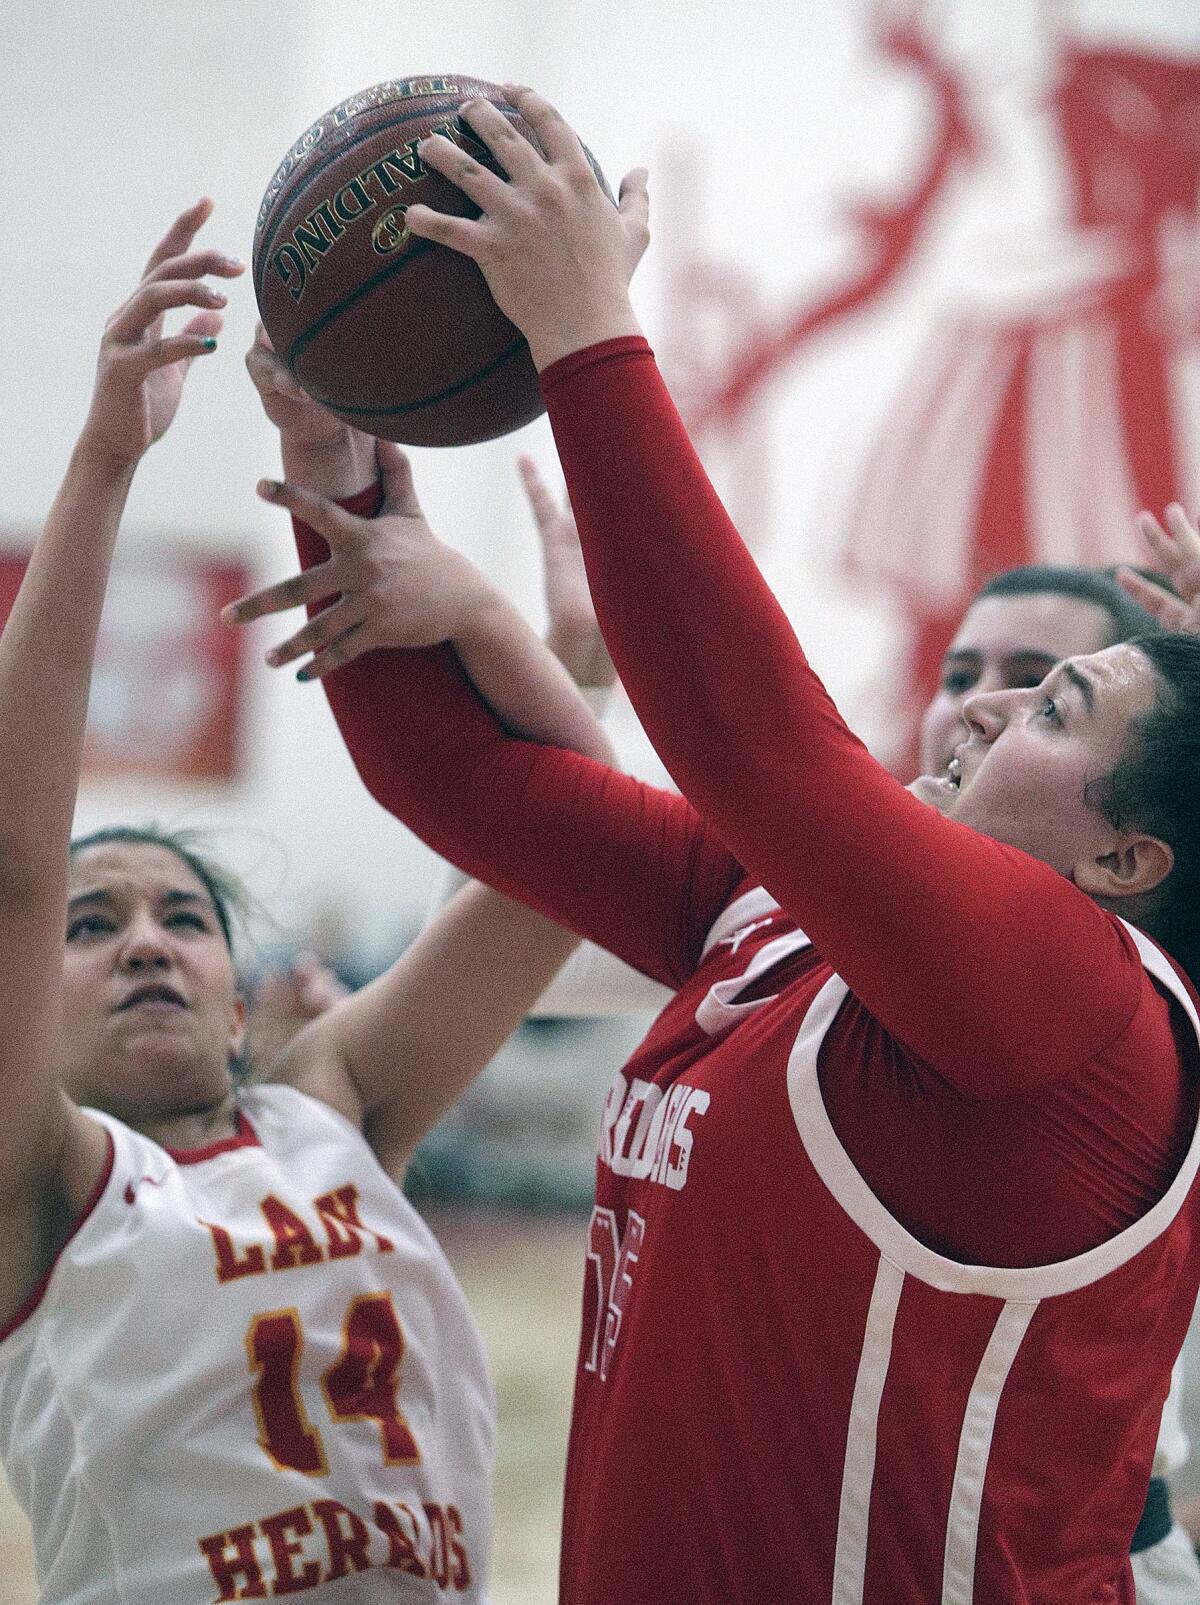 Burroughs' Sydney Martin pulls down a rebound against Whittier Christian's Aidan Sherfey in the CIF Southern Section Division II-A girls' basketball quarterfinal at Whittier Christian High School in La Habra on Wednesday, February 19, 2020. Burroughs won the game 41-39, a game that was hard fought until the last points were scored